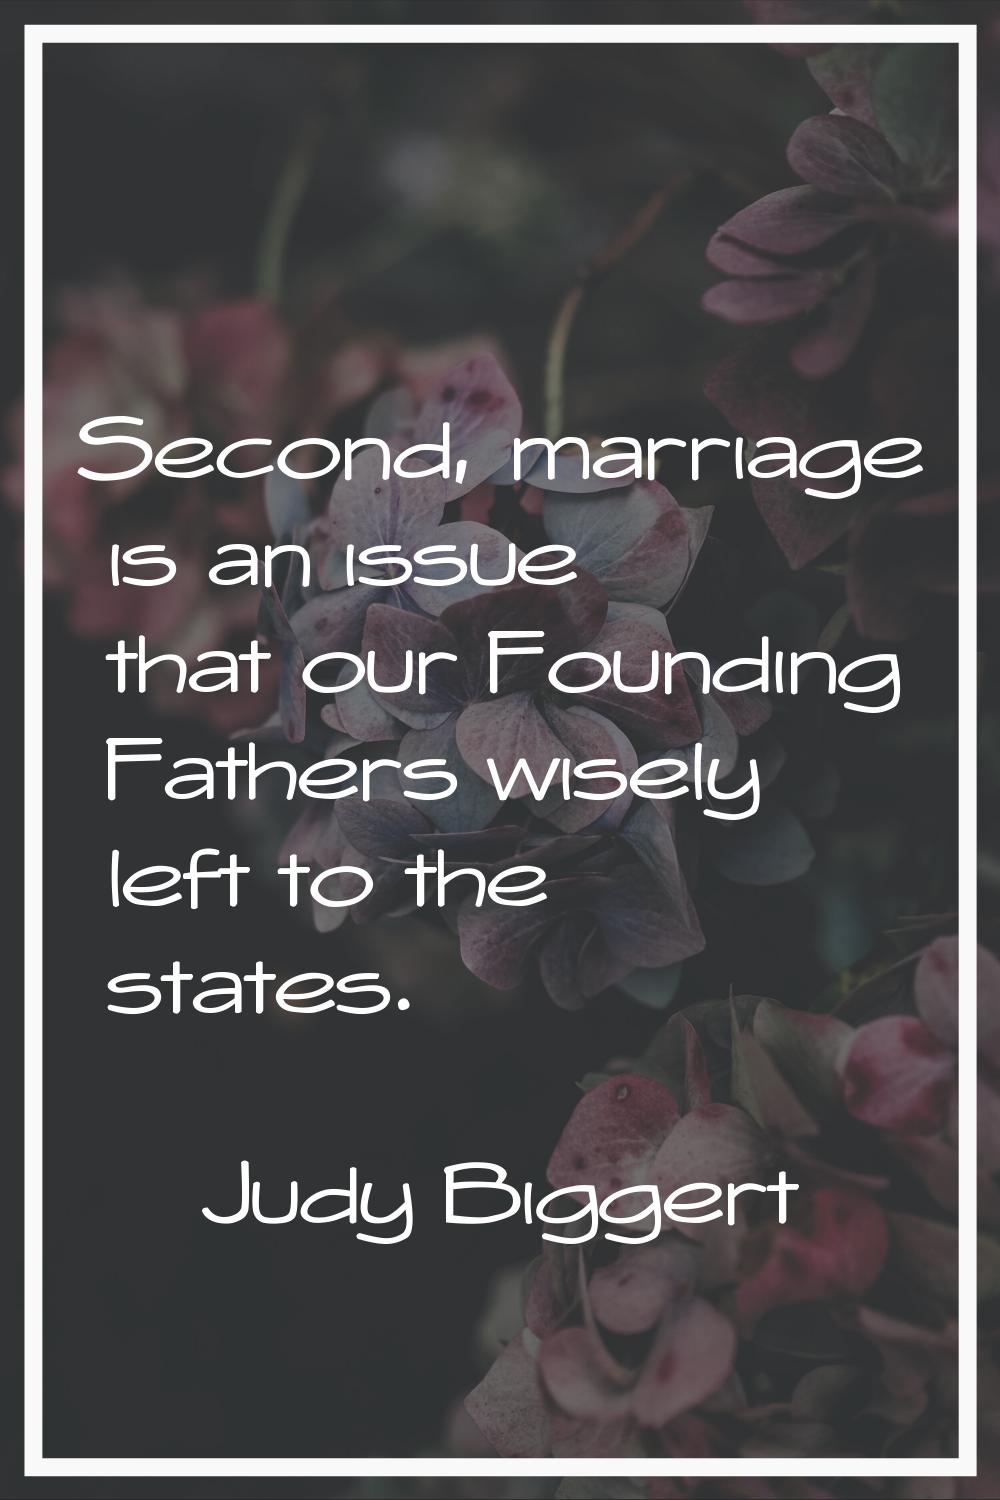 Second, marriage is an issue that our Founding Fathers wisely left to the states.